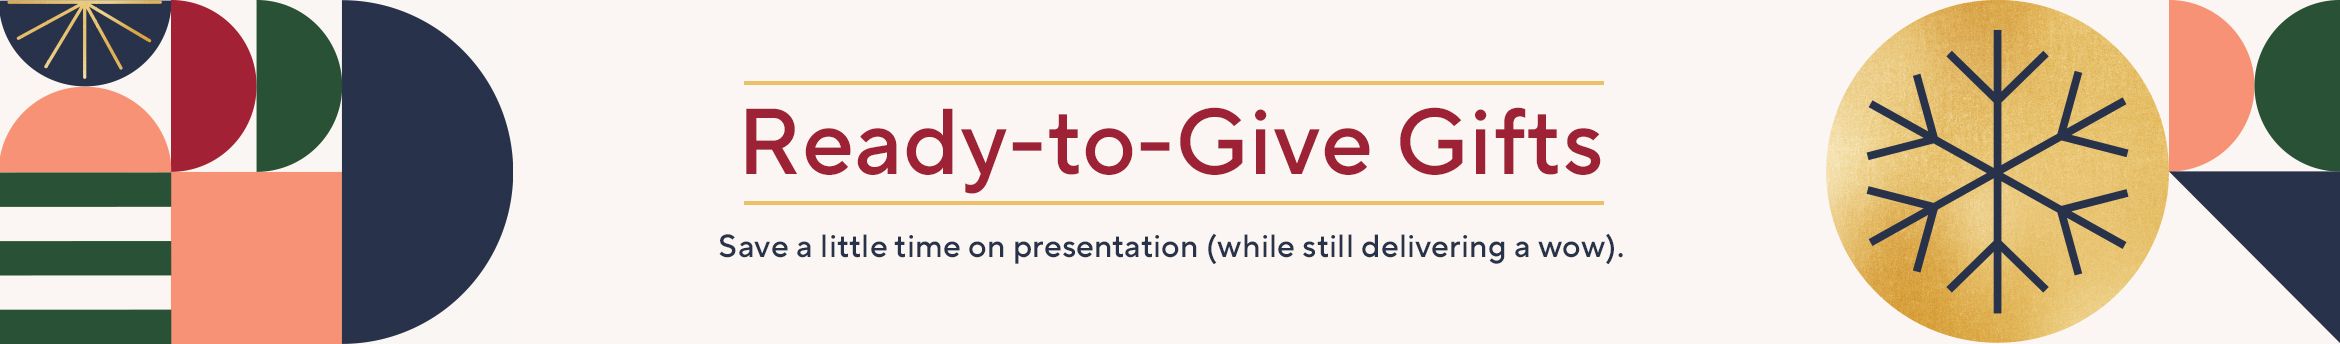 Ready-to-Give Gifts: Save a little time on presentation (while still delivering a wow). 